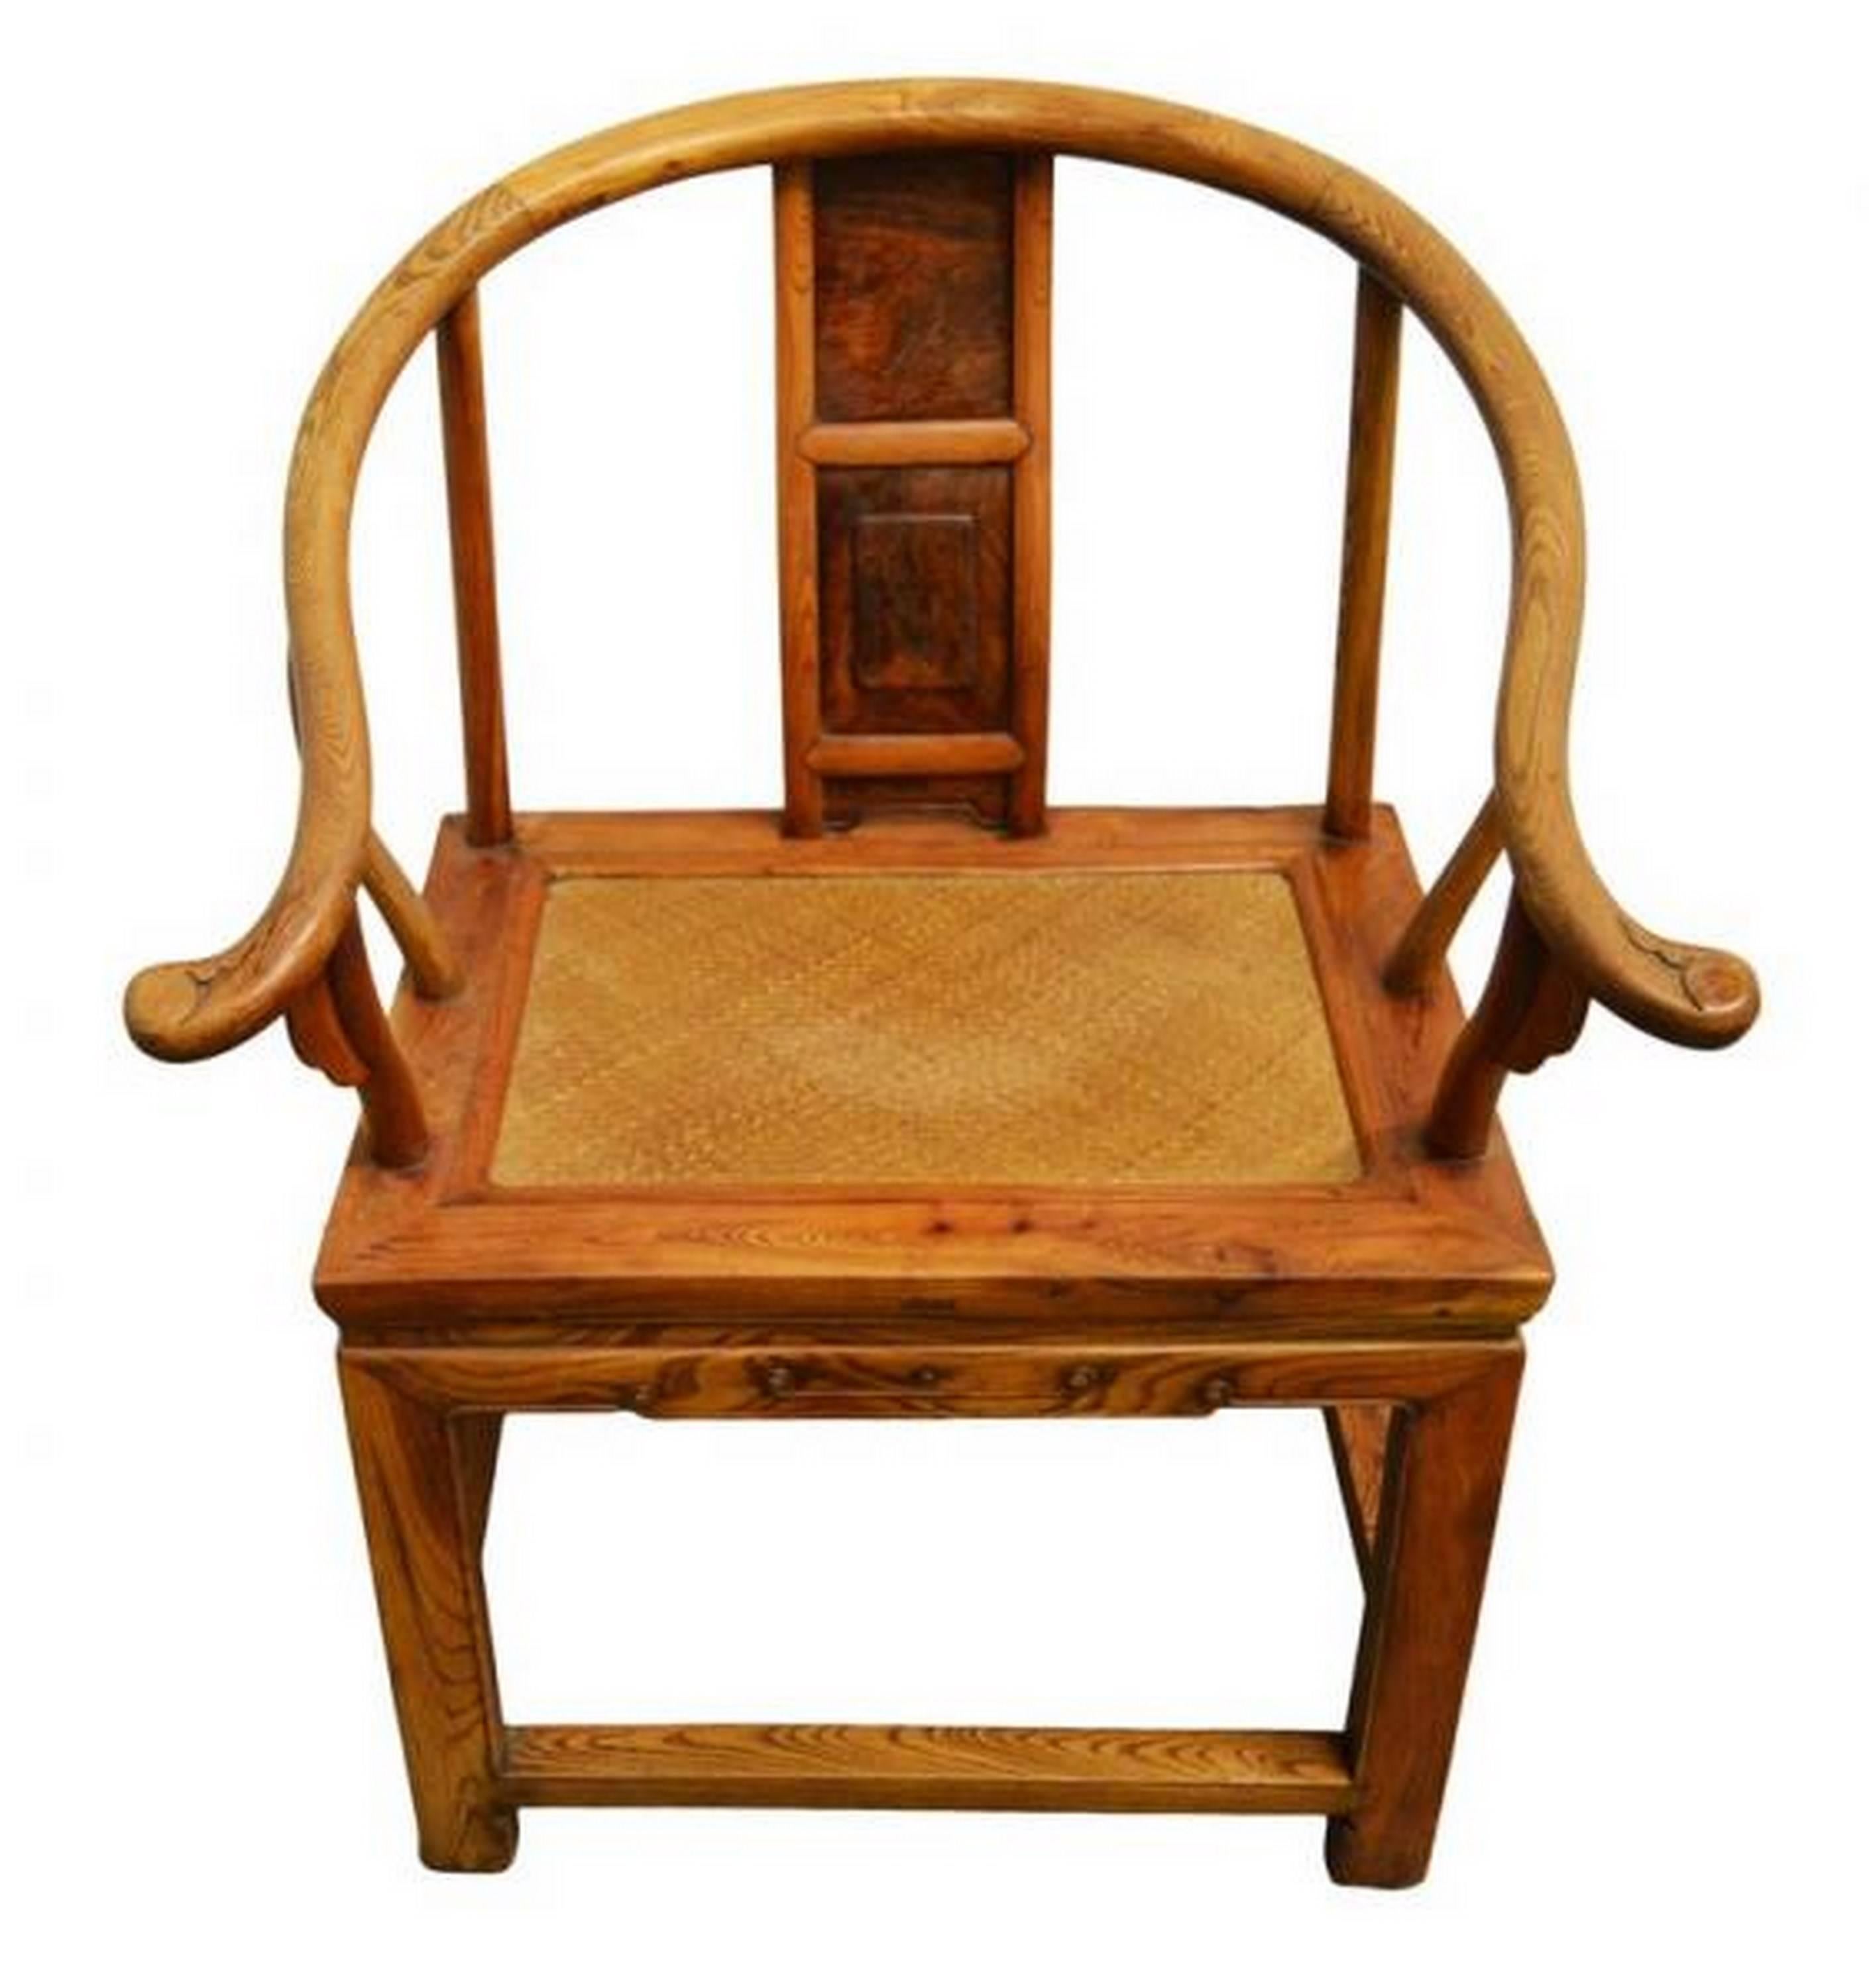 Wood 19th Century Chinese Light Brown Lacquered Horseshoe Back Chair with Rattan Seat